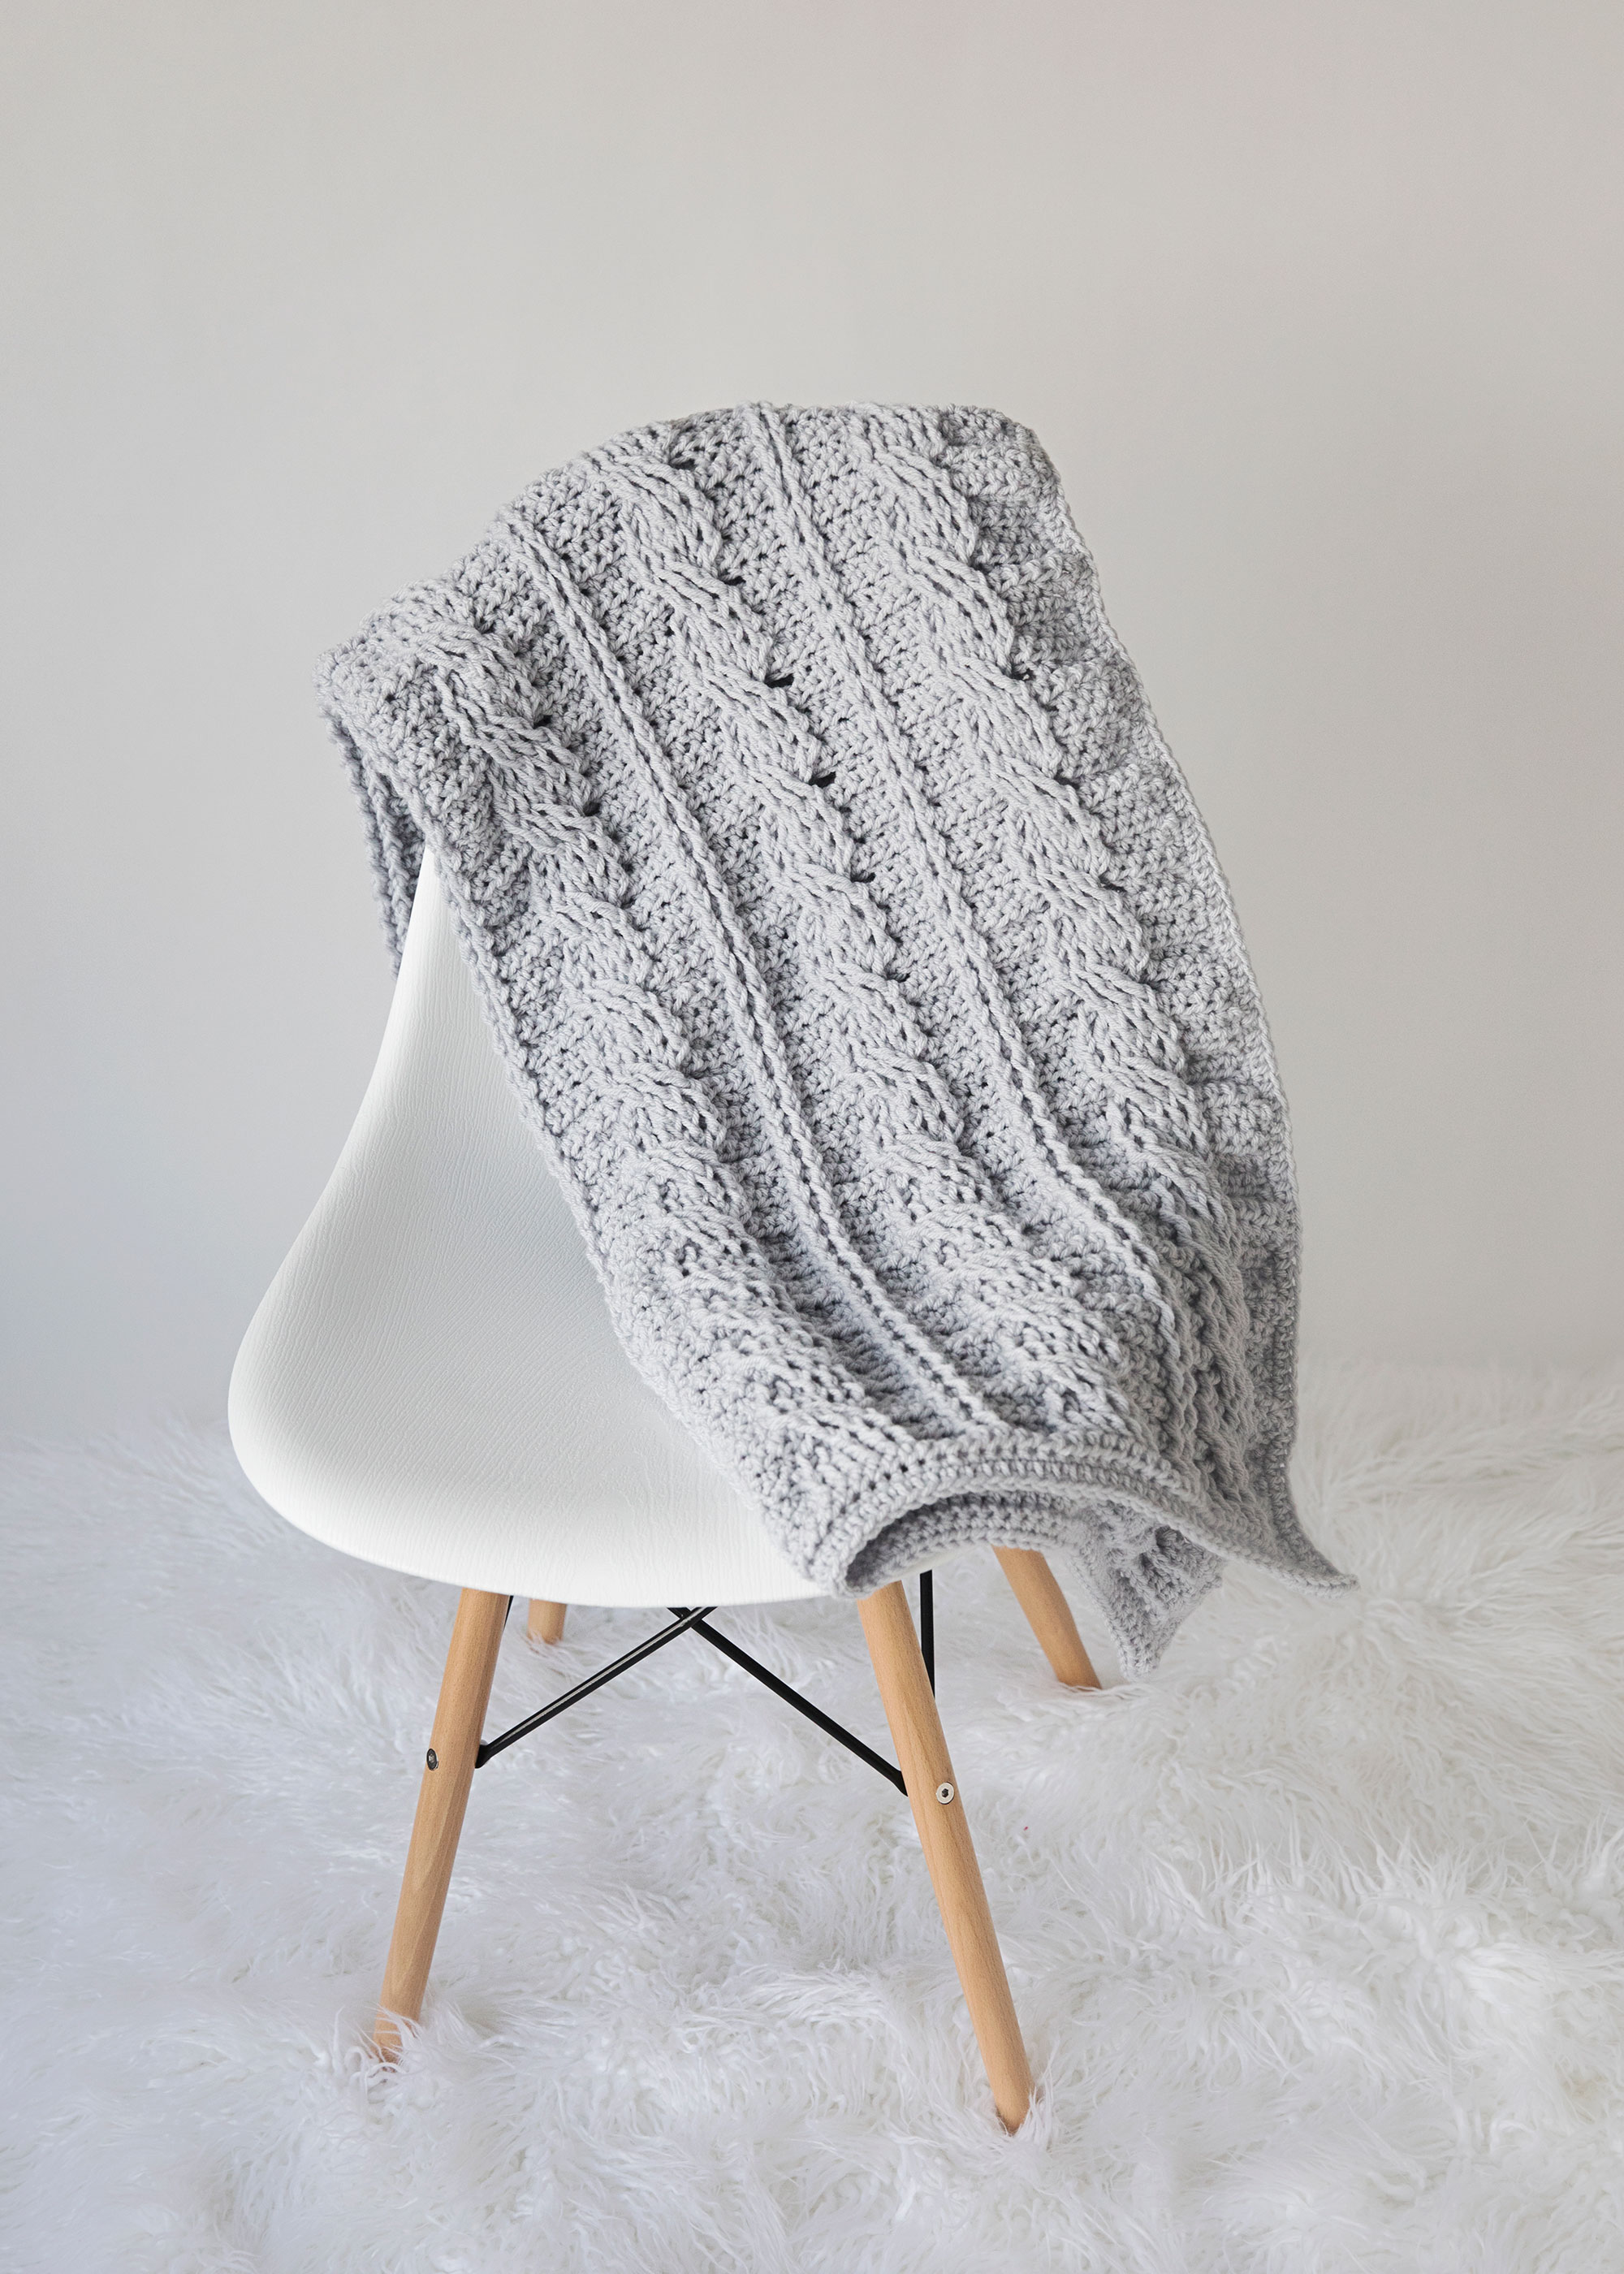 Cable Crochet Blanket - A Timeless Pattern - Leelee Knits